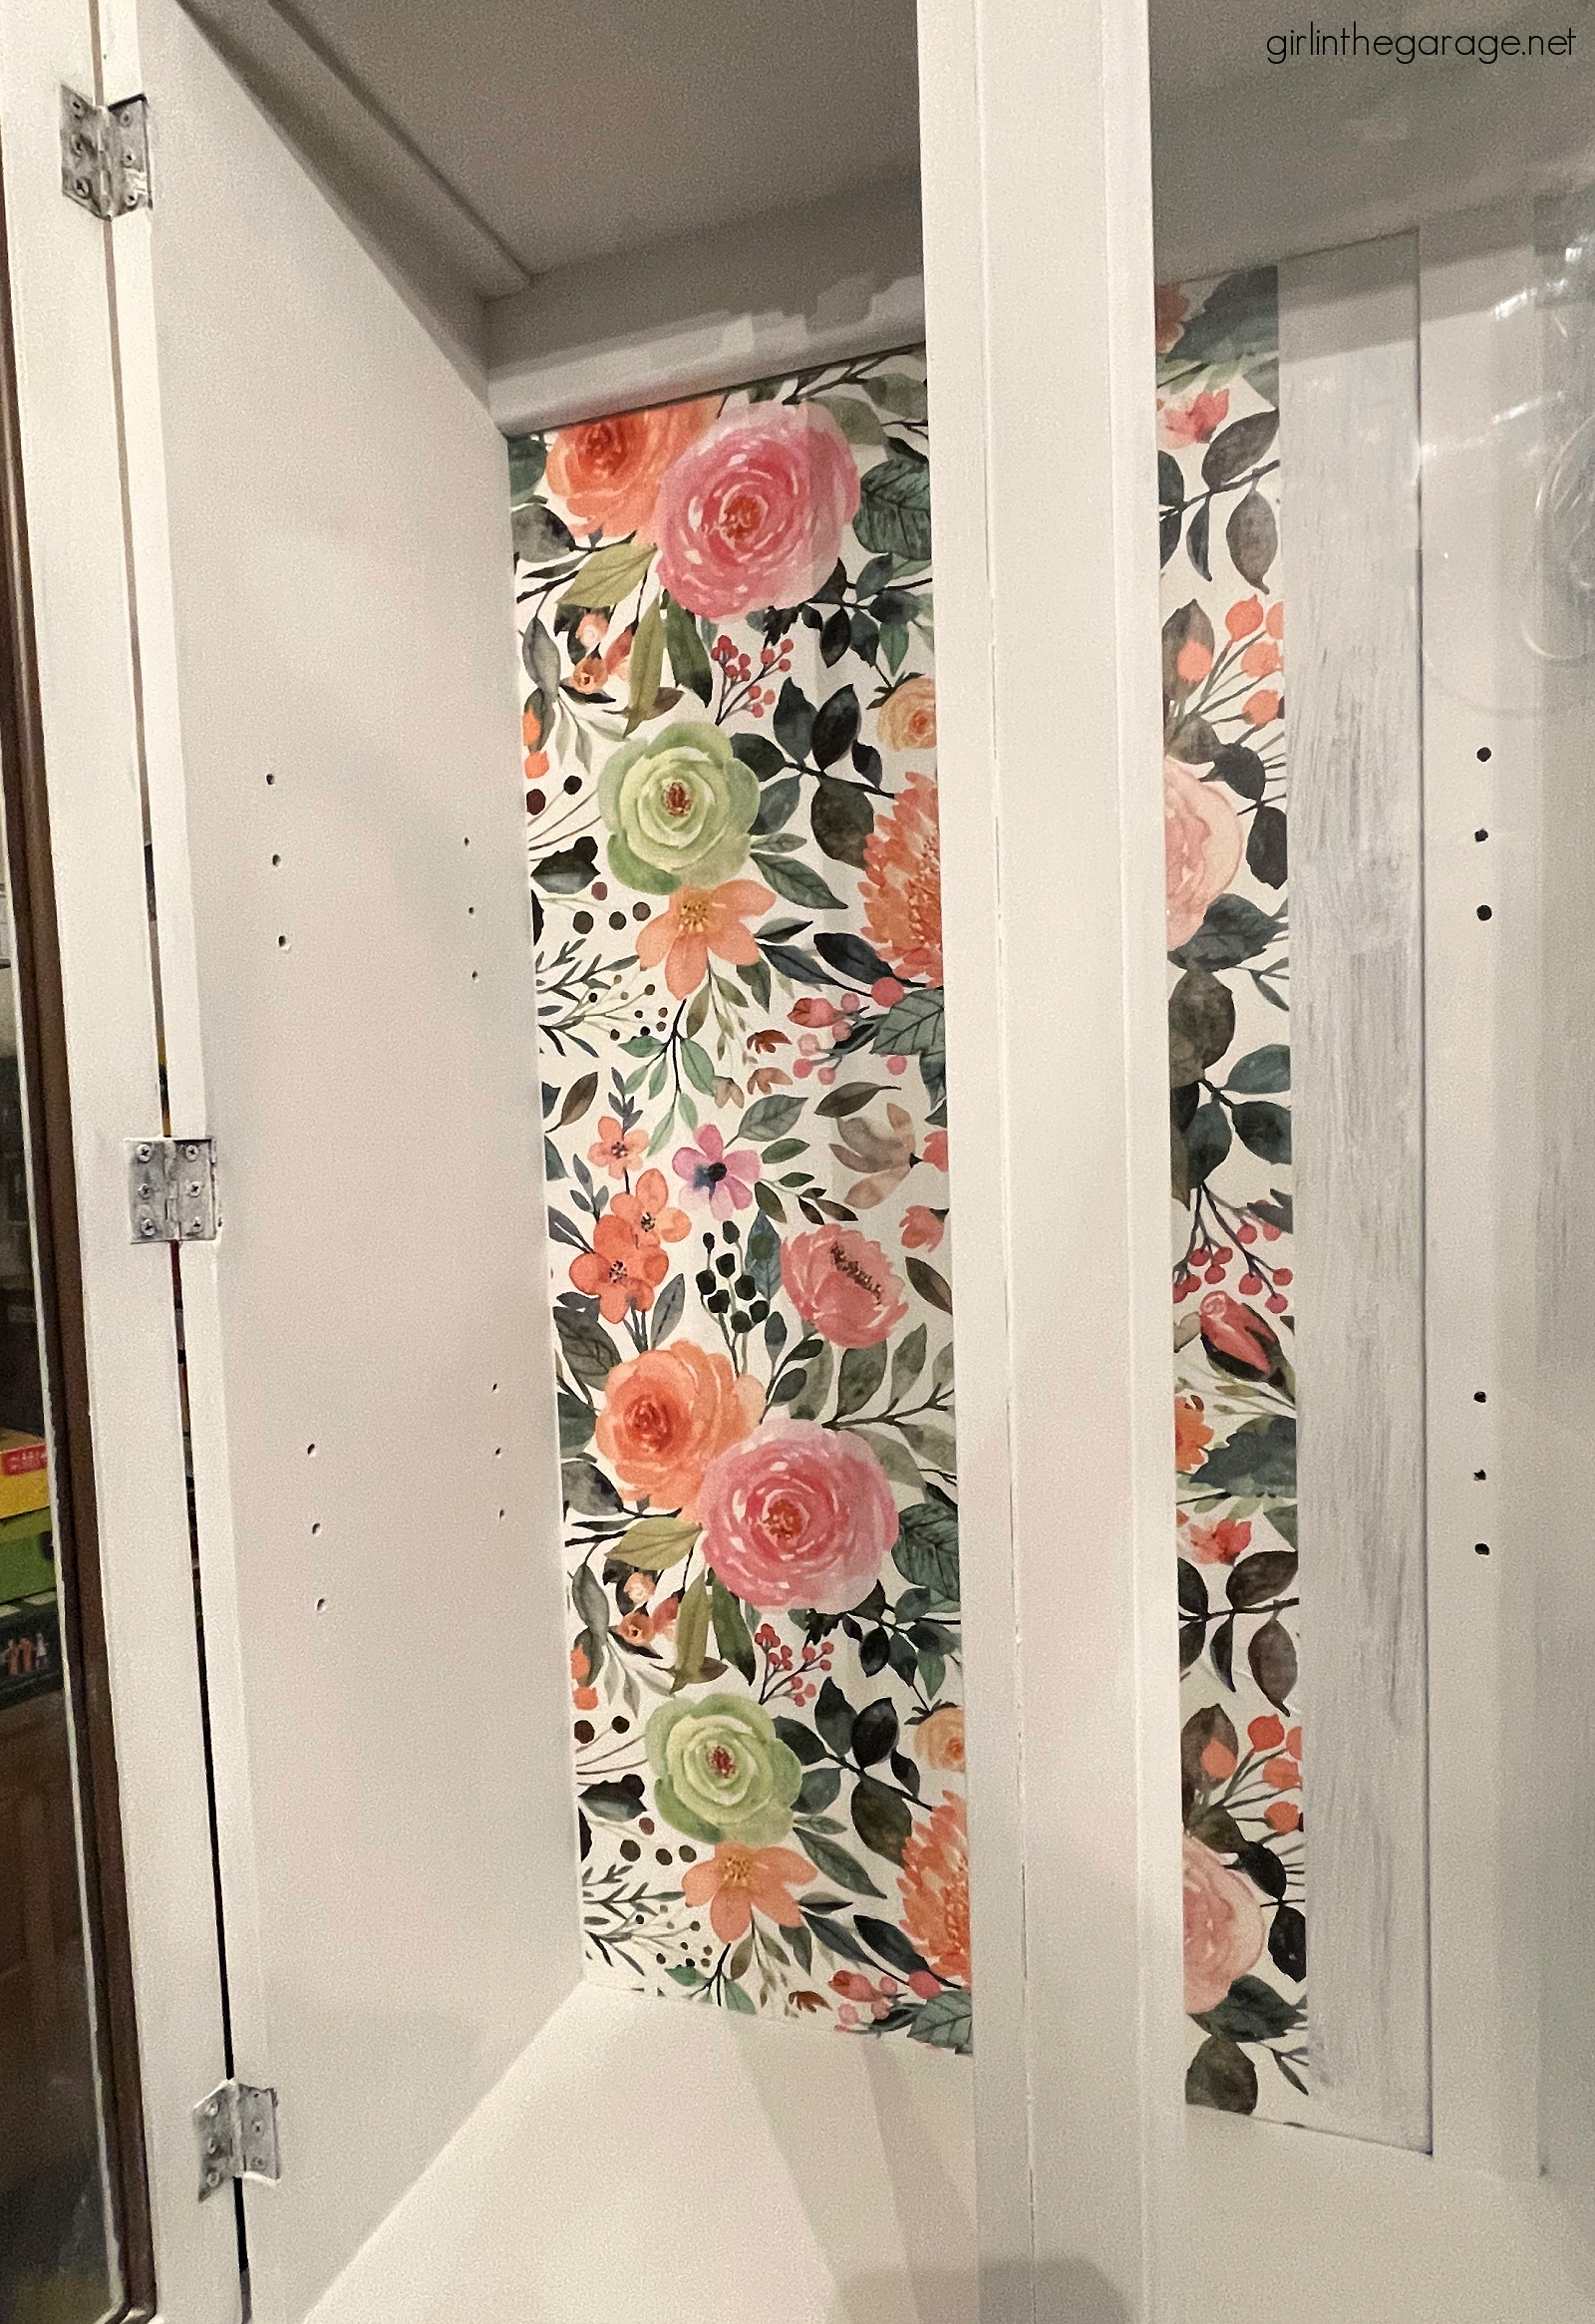 How to create a gorgeous painted china cabinet with wallpapered back. Full tutorial with photos by Girl in the Garage.